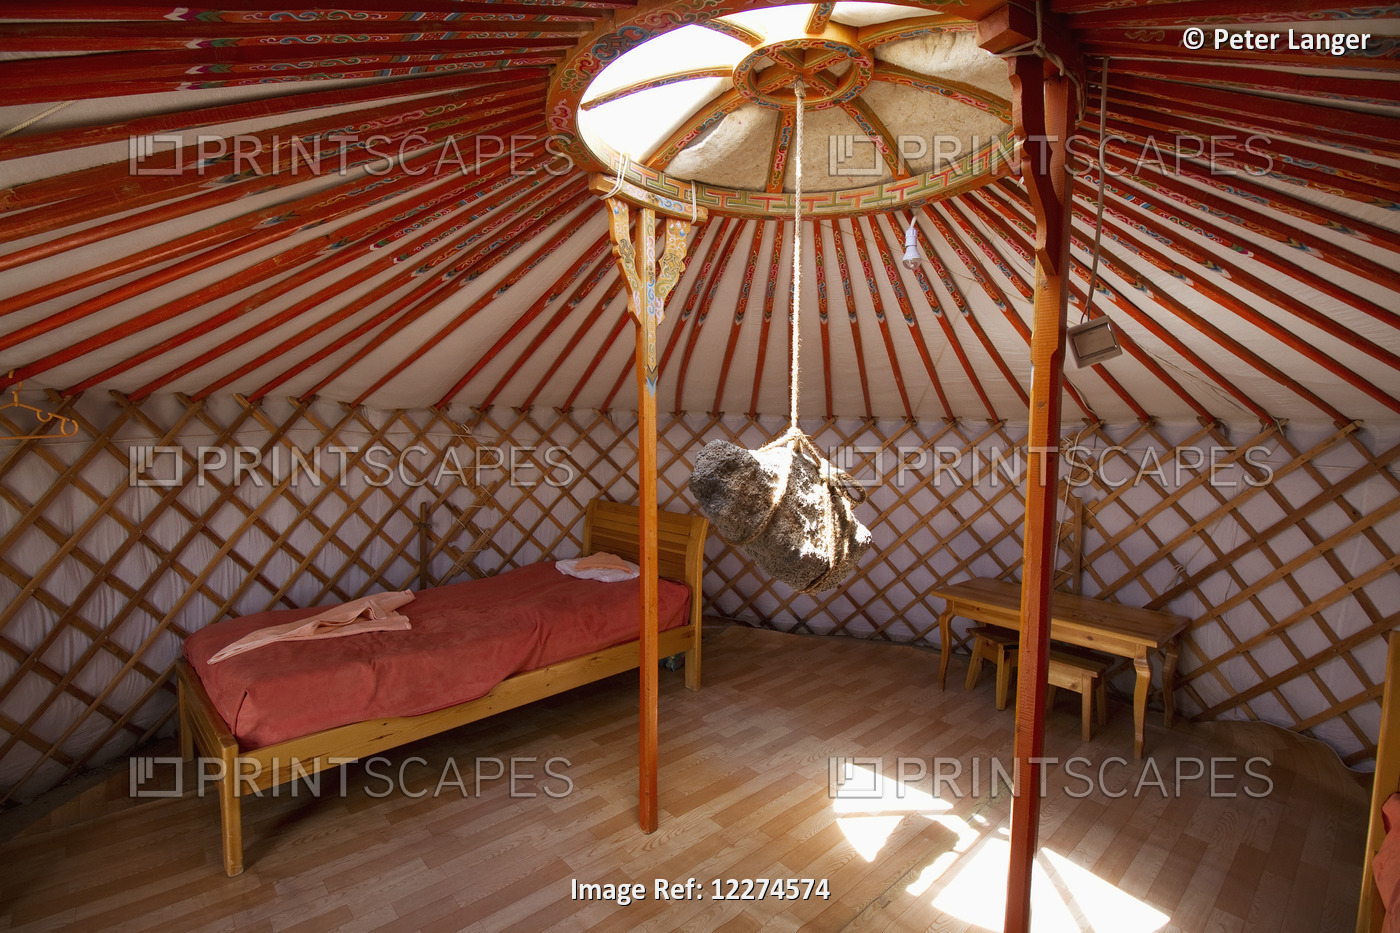 Rock Hanging Of The Crown In The Interior Of A Mongolian Ger (Yurt) Tourist ...